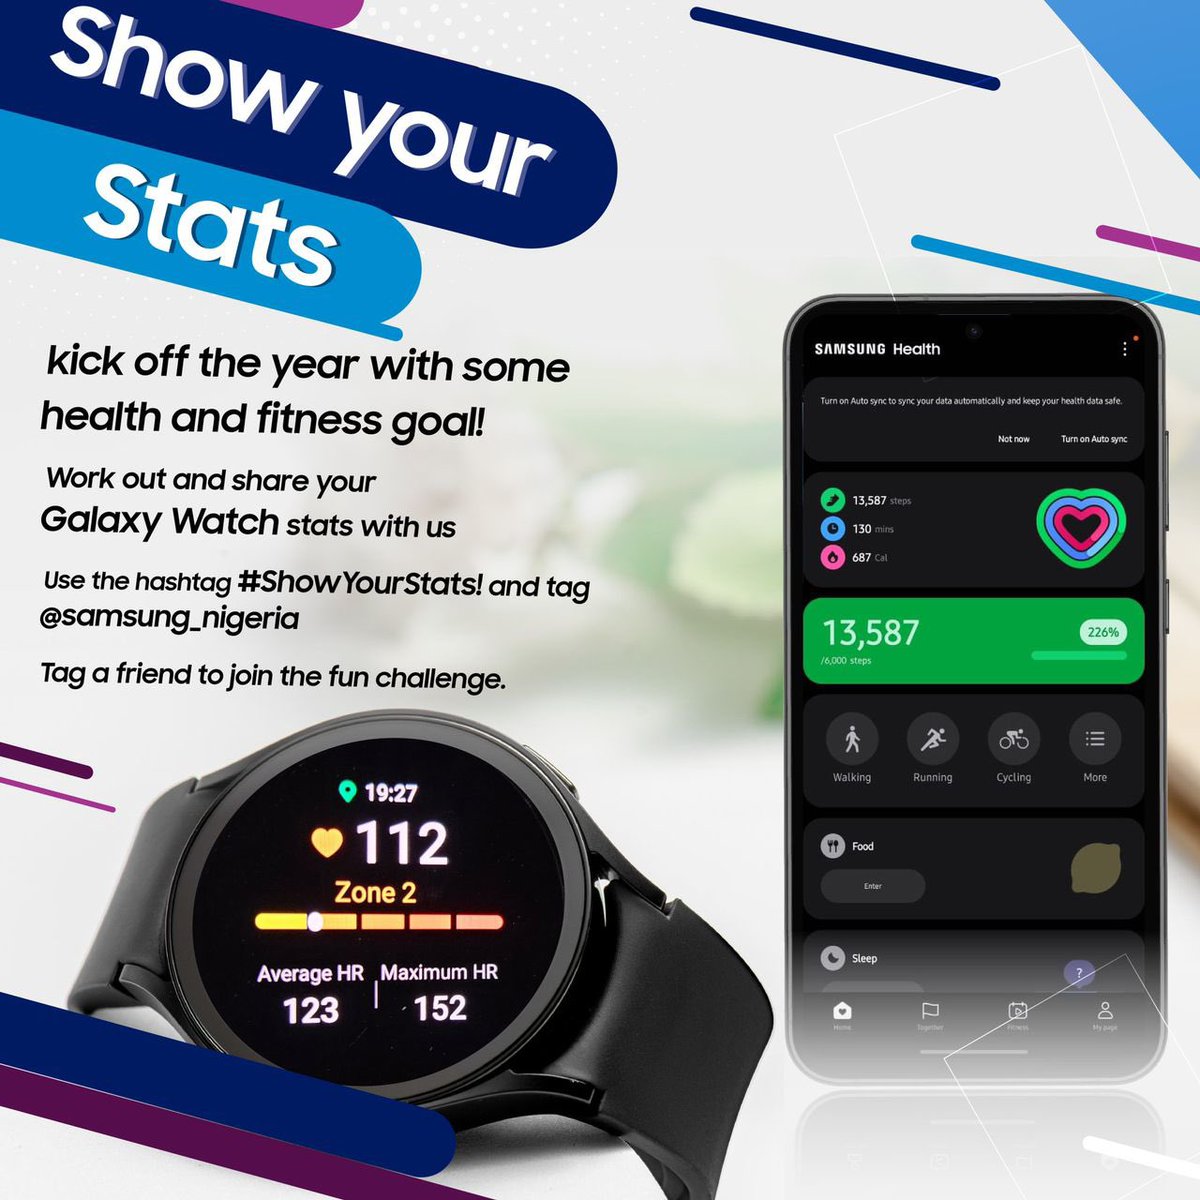 Get up and get moving with your Galaxy watch or phone. 

Share your stats with #MyGalaxyStats and enter to win amazing prizes from @SamsungNigeria